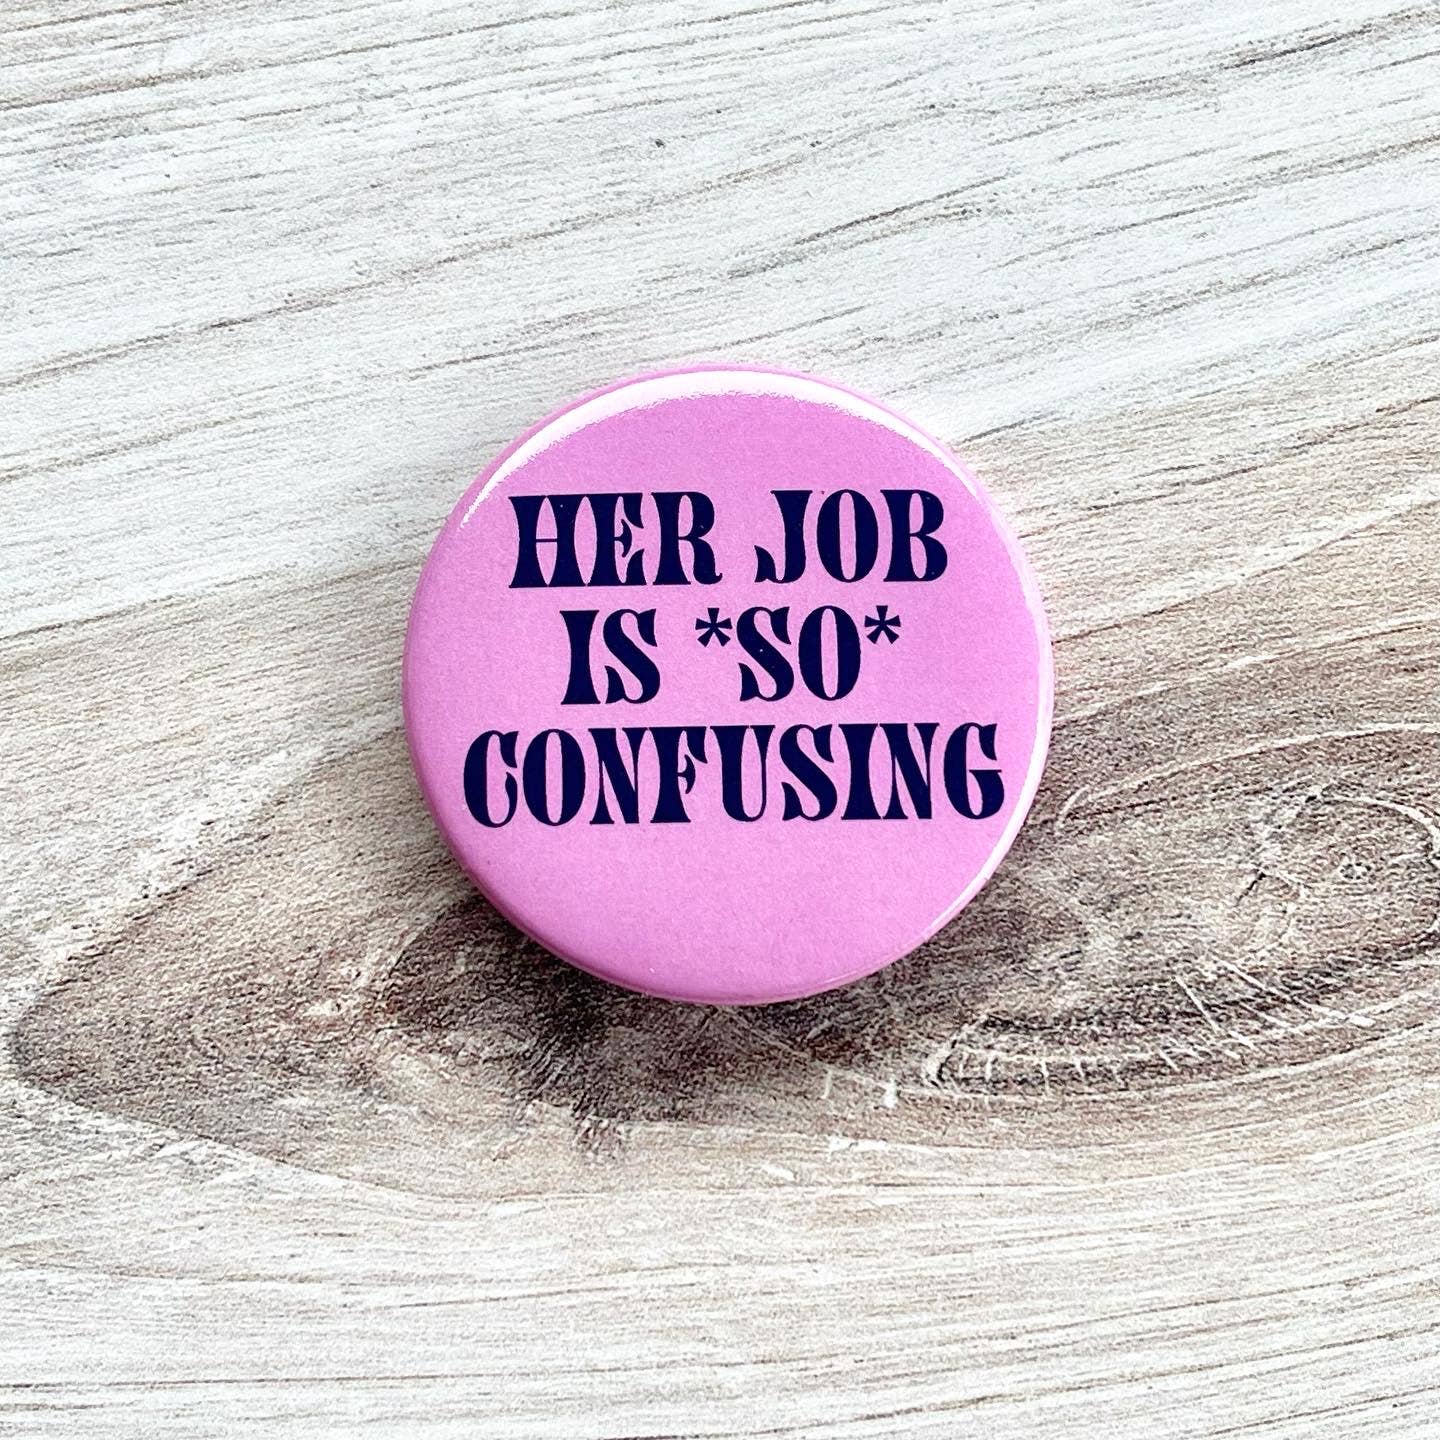 Her job is so confusing Pinback button pin funny gift boss